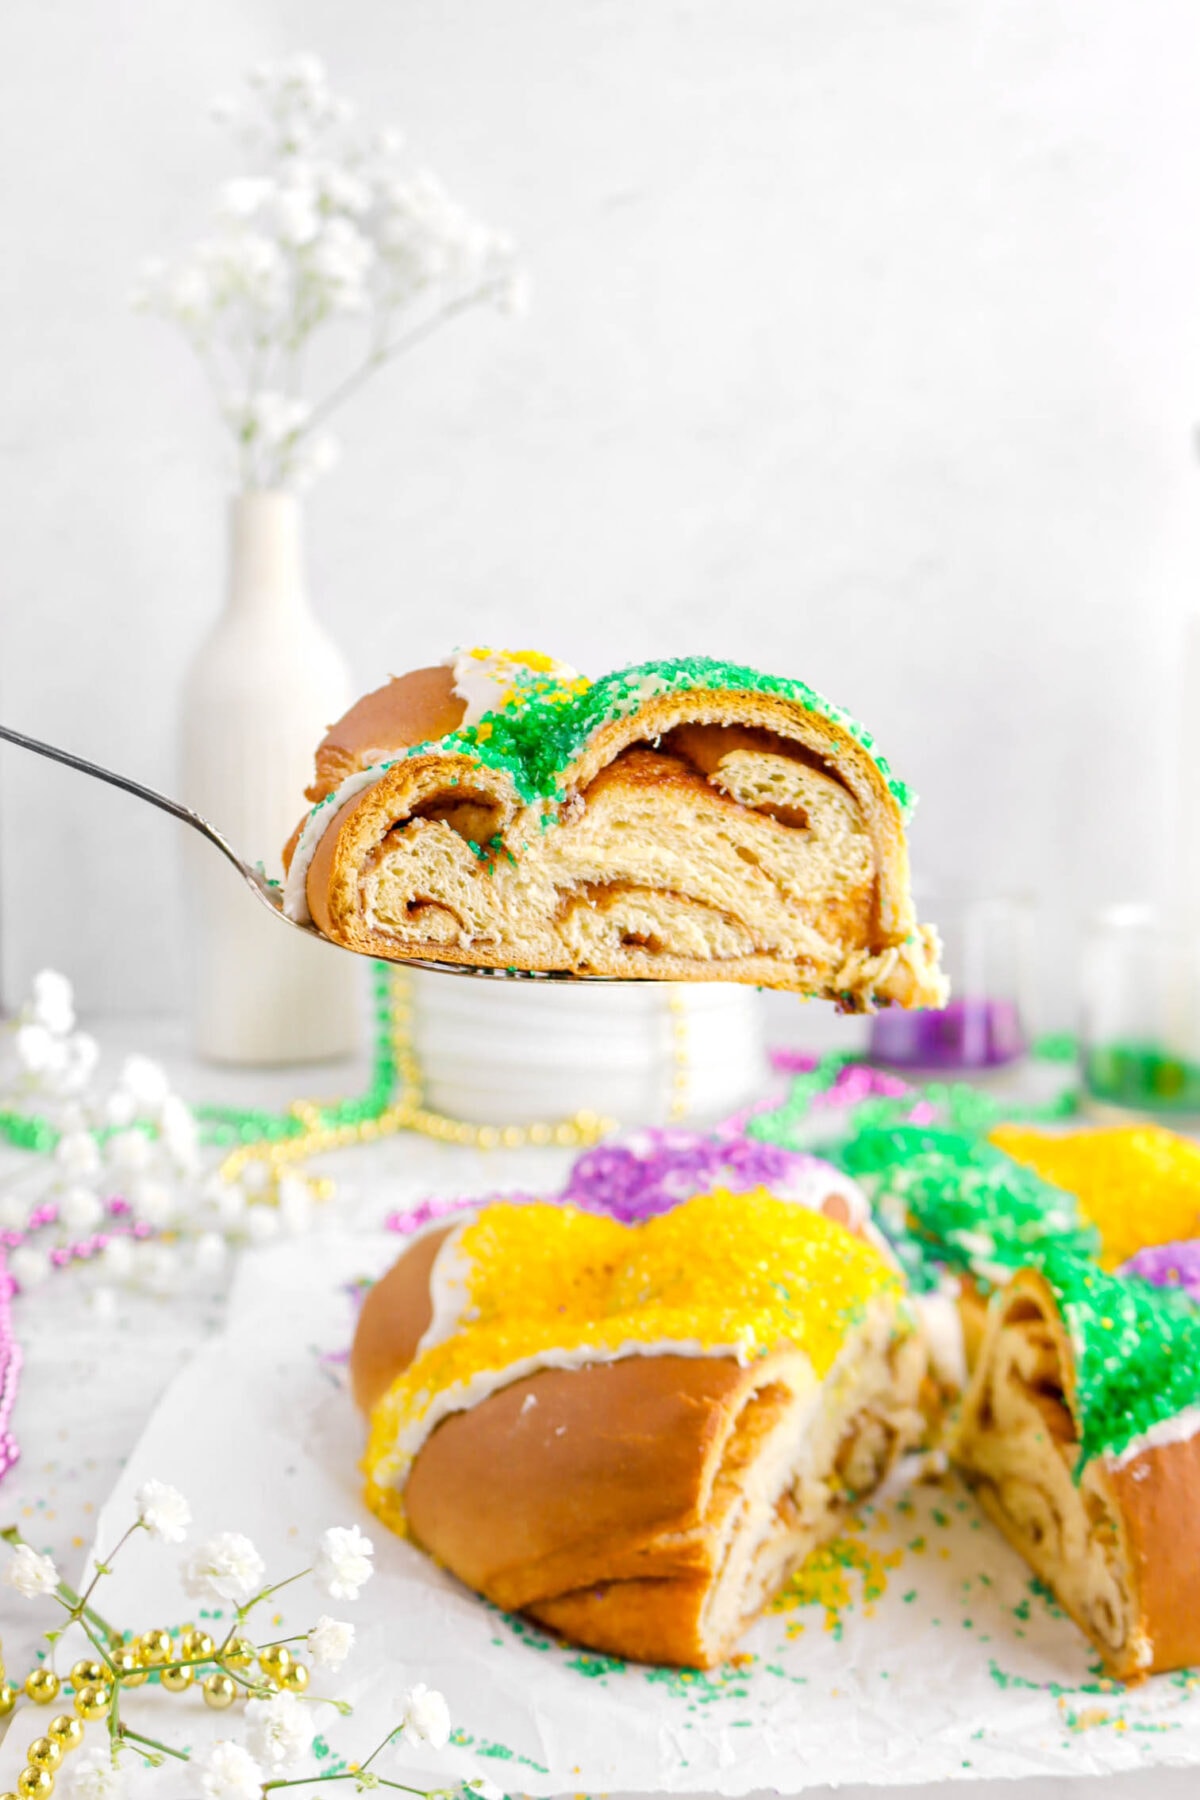 slice being held over king cake on cake server with flowers and plates behind